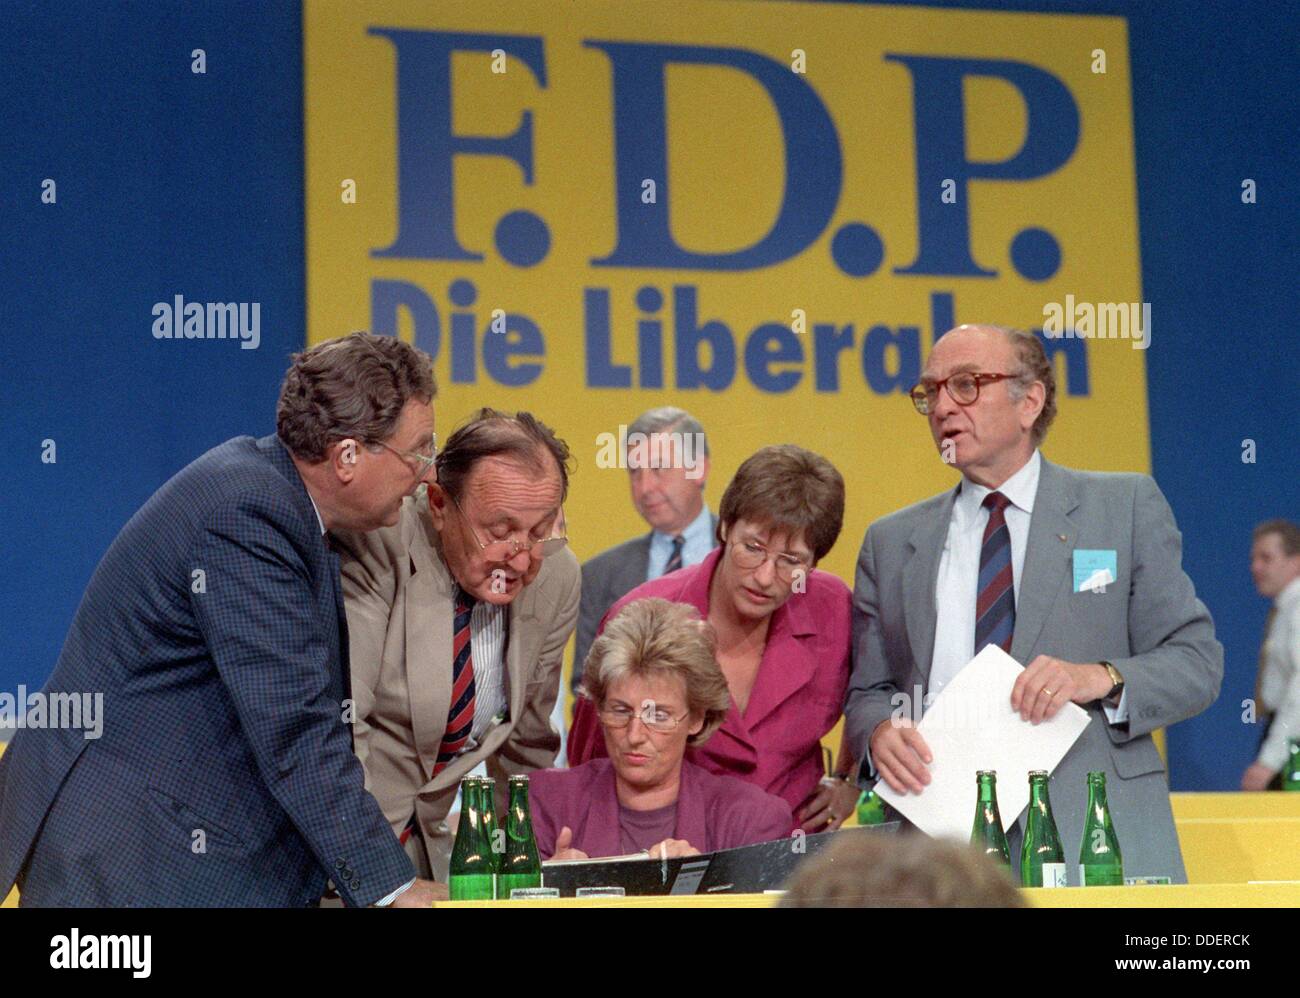 The Liberals (l-r) Gerhart Baum, Hans-Dietrich Genscher, Cornelia Schmalz-Jacobsen, Irmgard Adam-Schwaetzer and chairman of the FDP Otto Graf Lambsdorff discuss at the Unification party conference of the FDP in Hannover on the 11th of August in 1990. Stock Photo